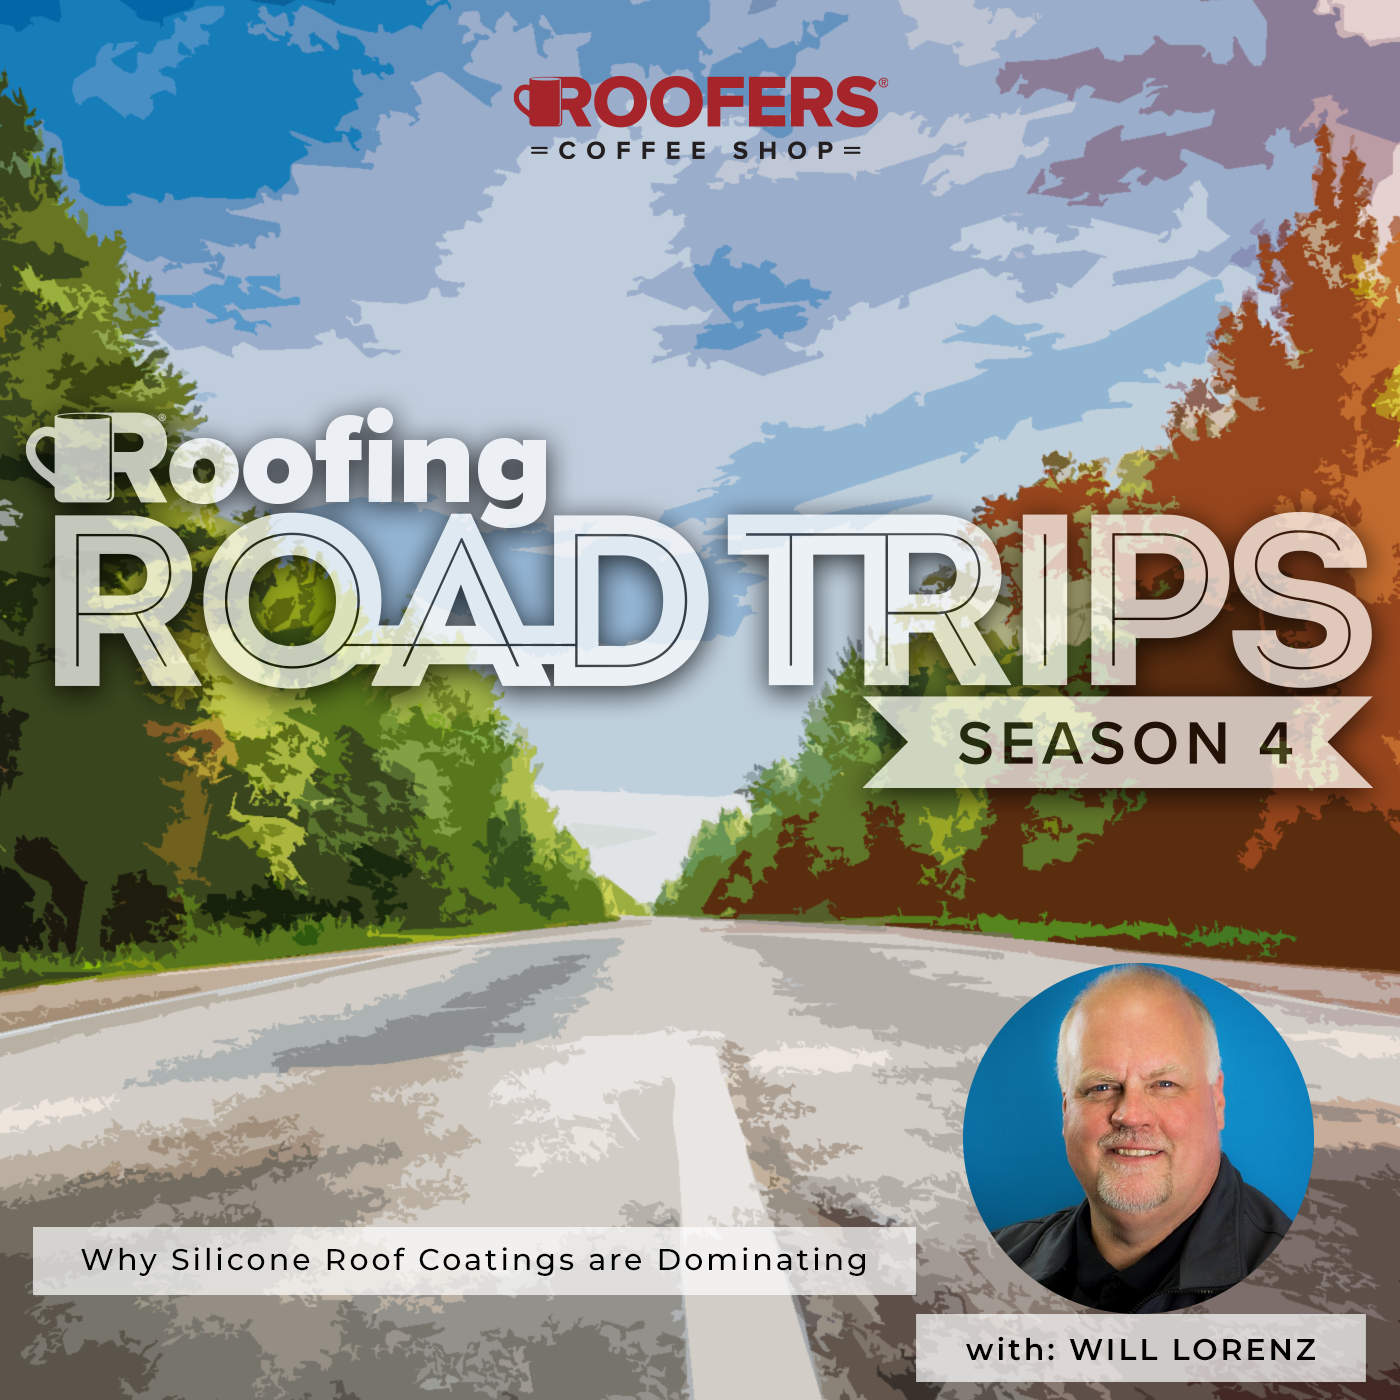 Will Lorenz - Why Silicone Roof Coatings are Dominating